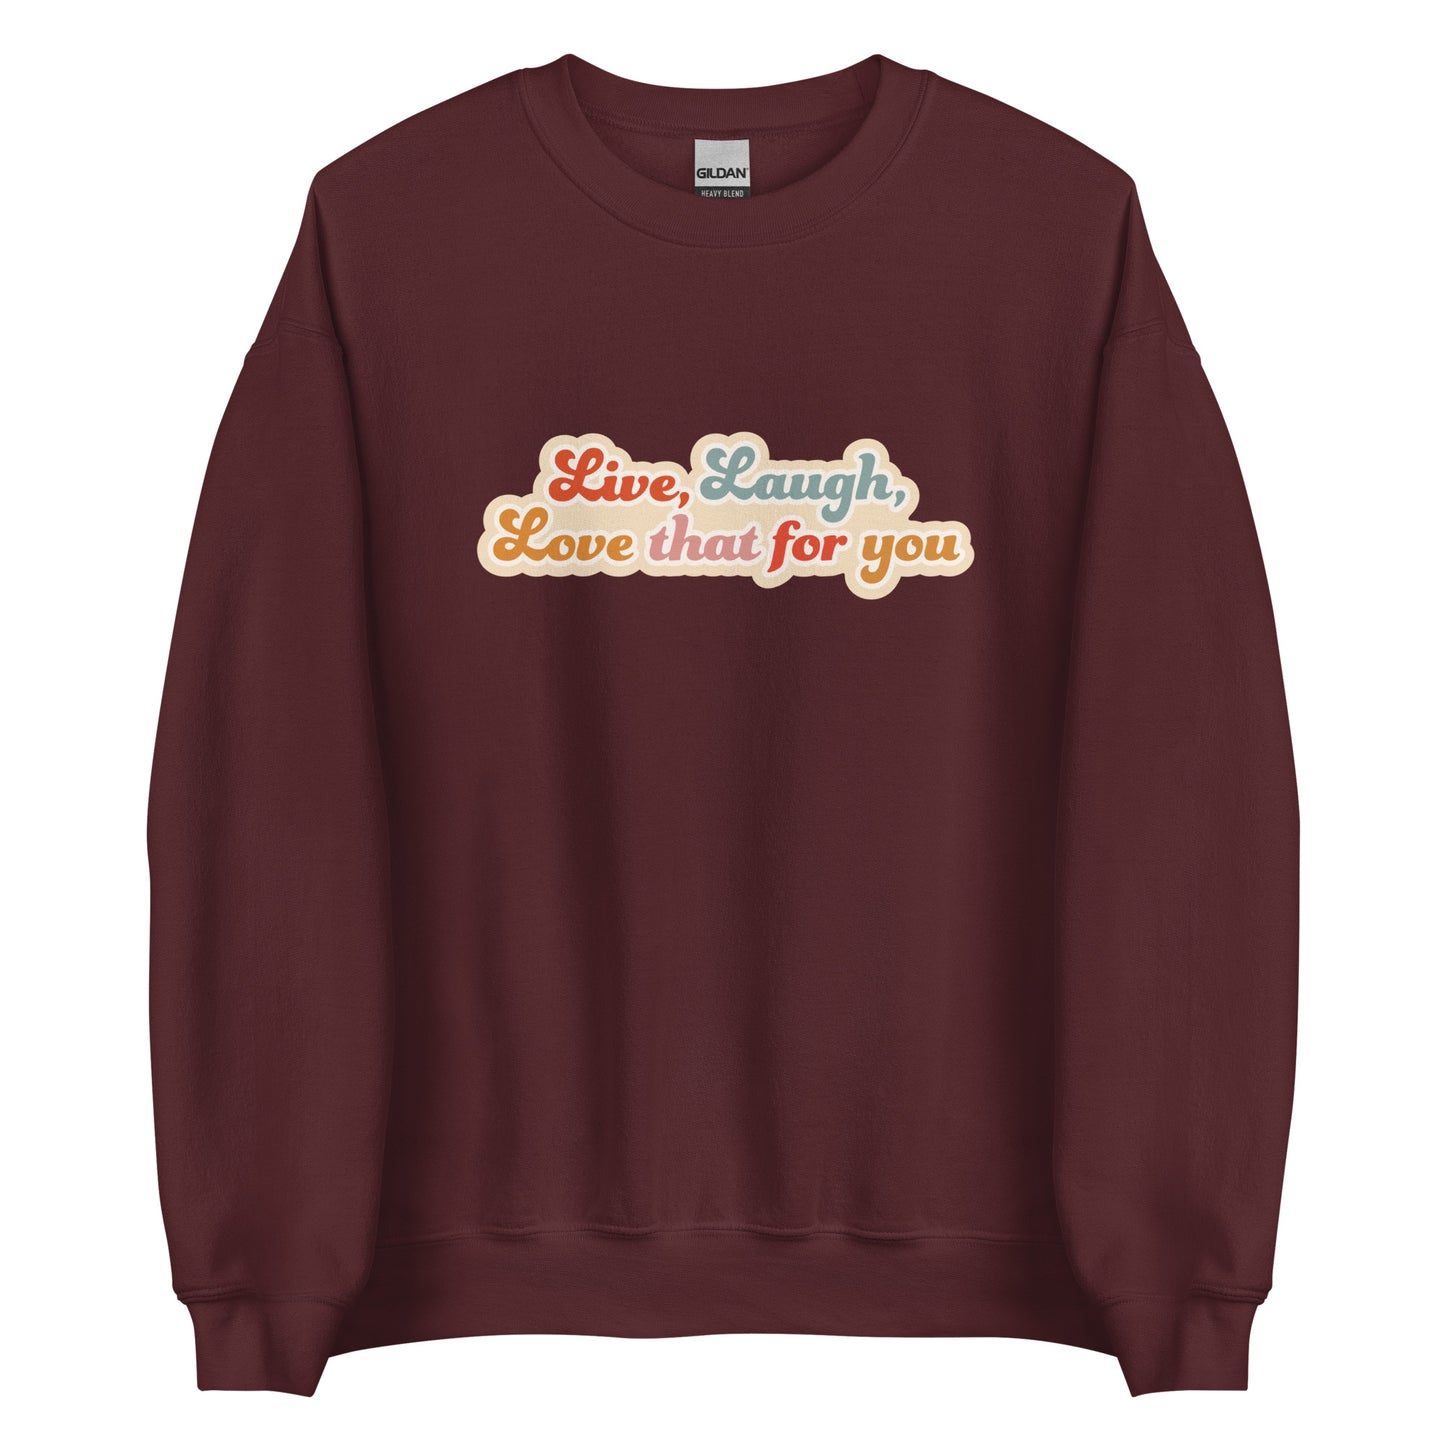 A maroon crewneck sweatshirt featuring colorful, cursive text that reads "Live, Laugh, Love that for you"